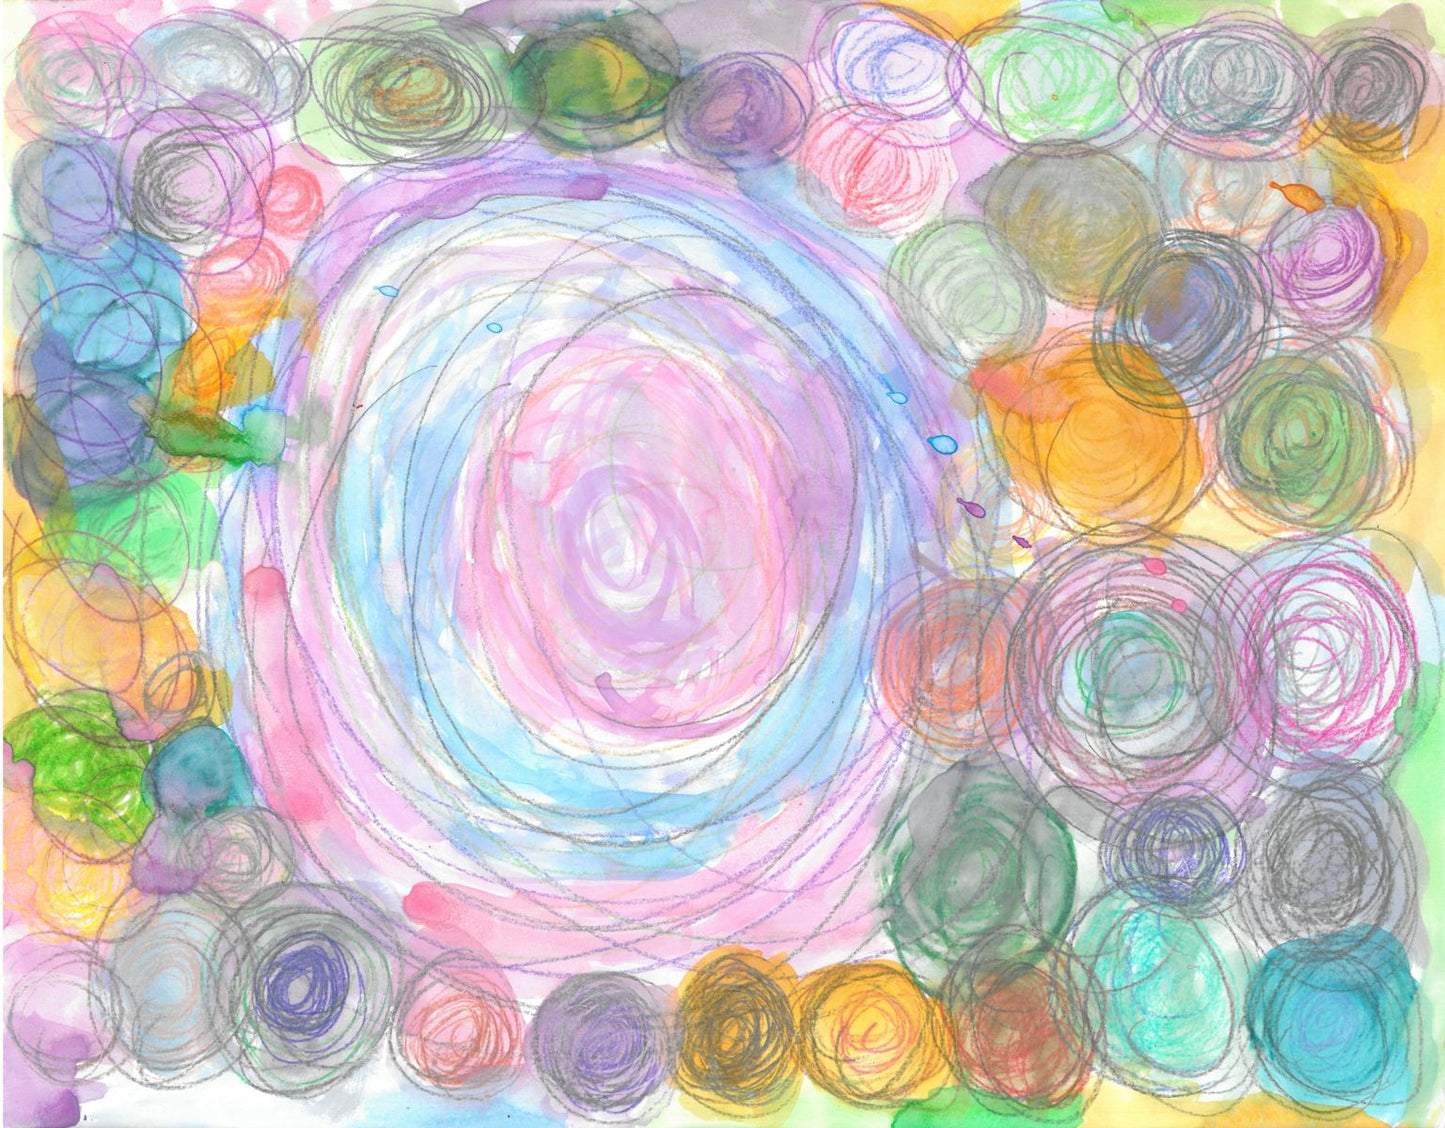 Pencil and ink on paper artwork with one main large pencil circle surrounded by many smaller pencil circles of pink, blue, green and orange colors